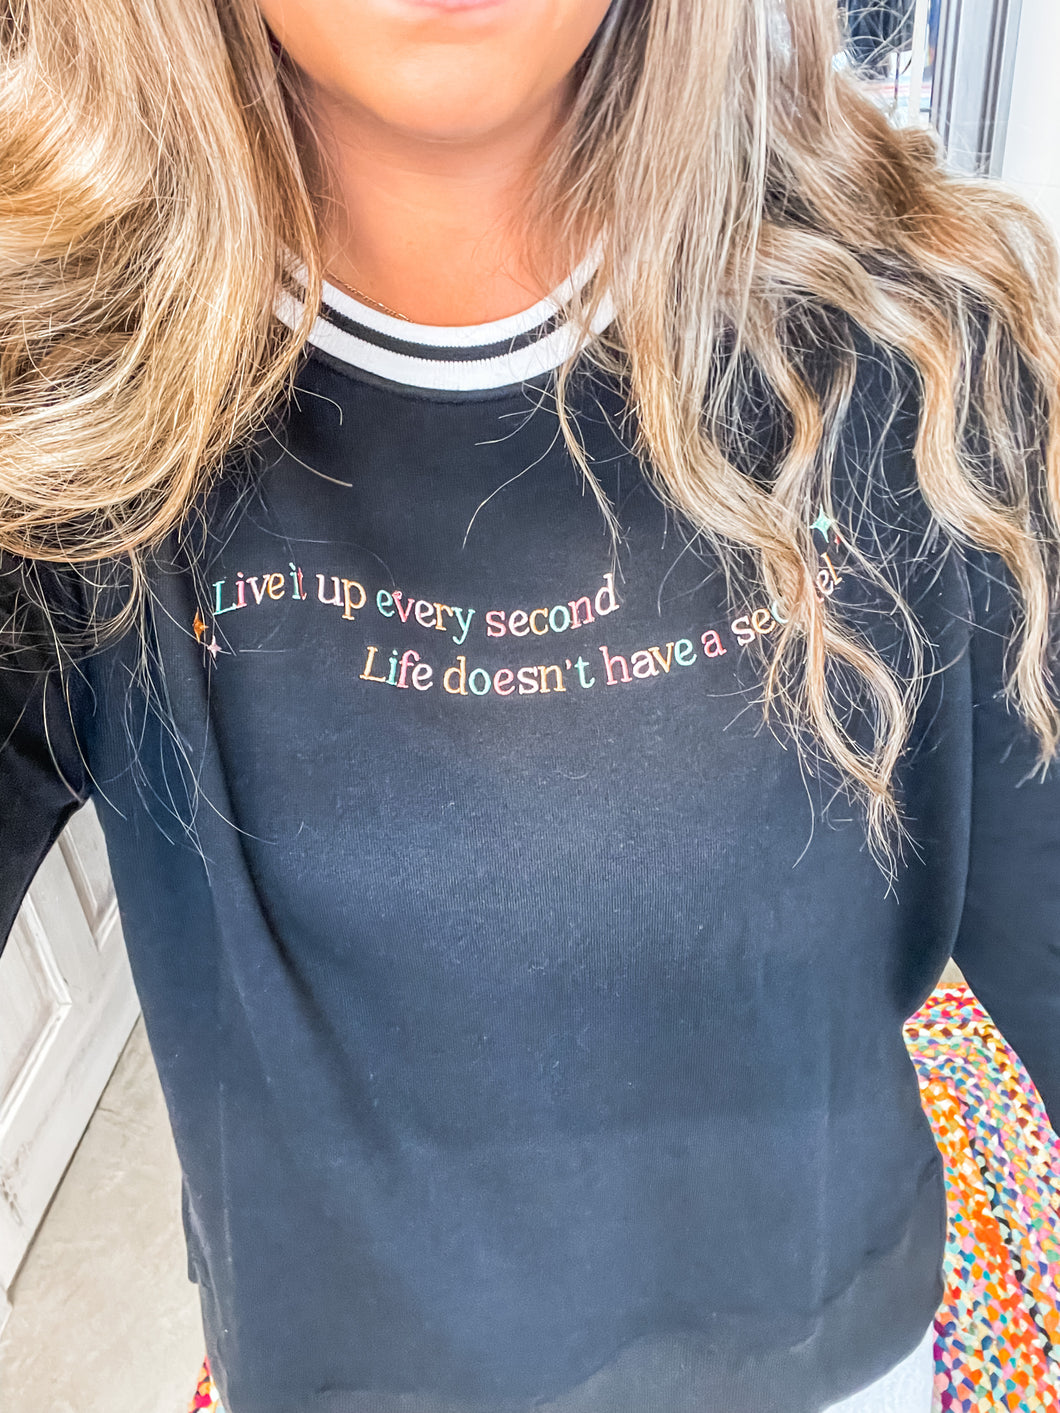 life doesn't have a sequel sweatshirt